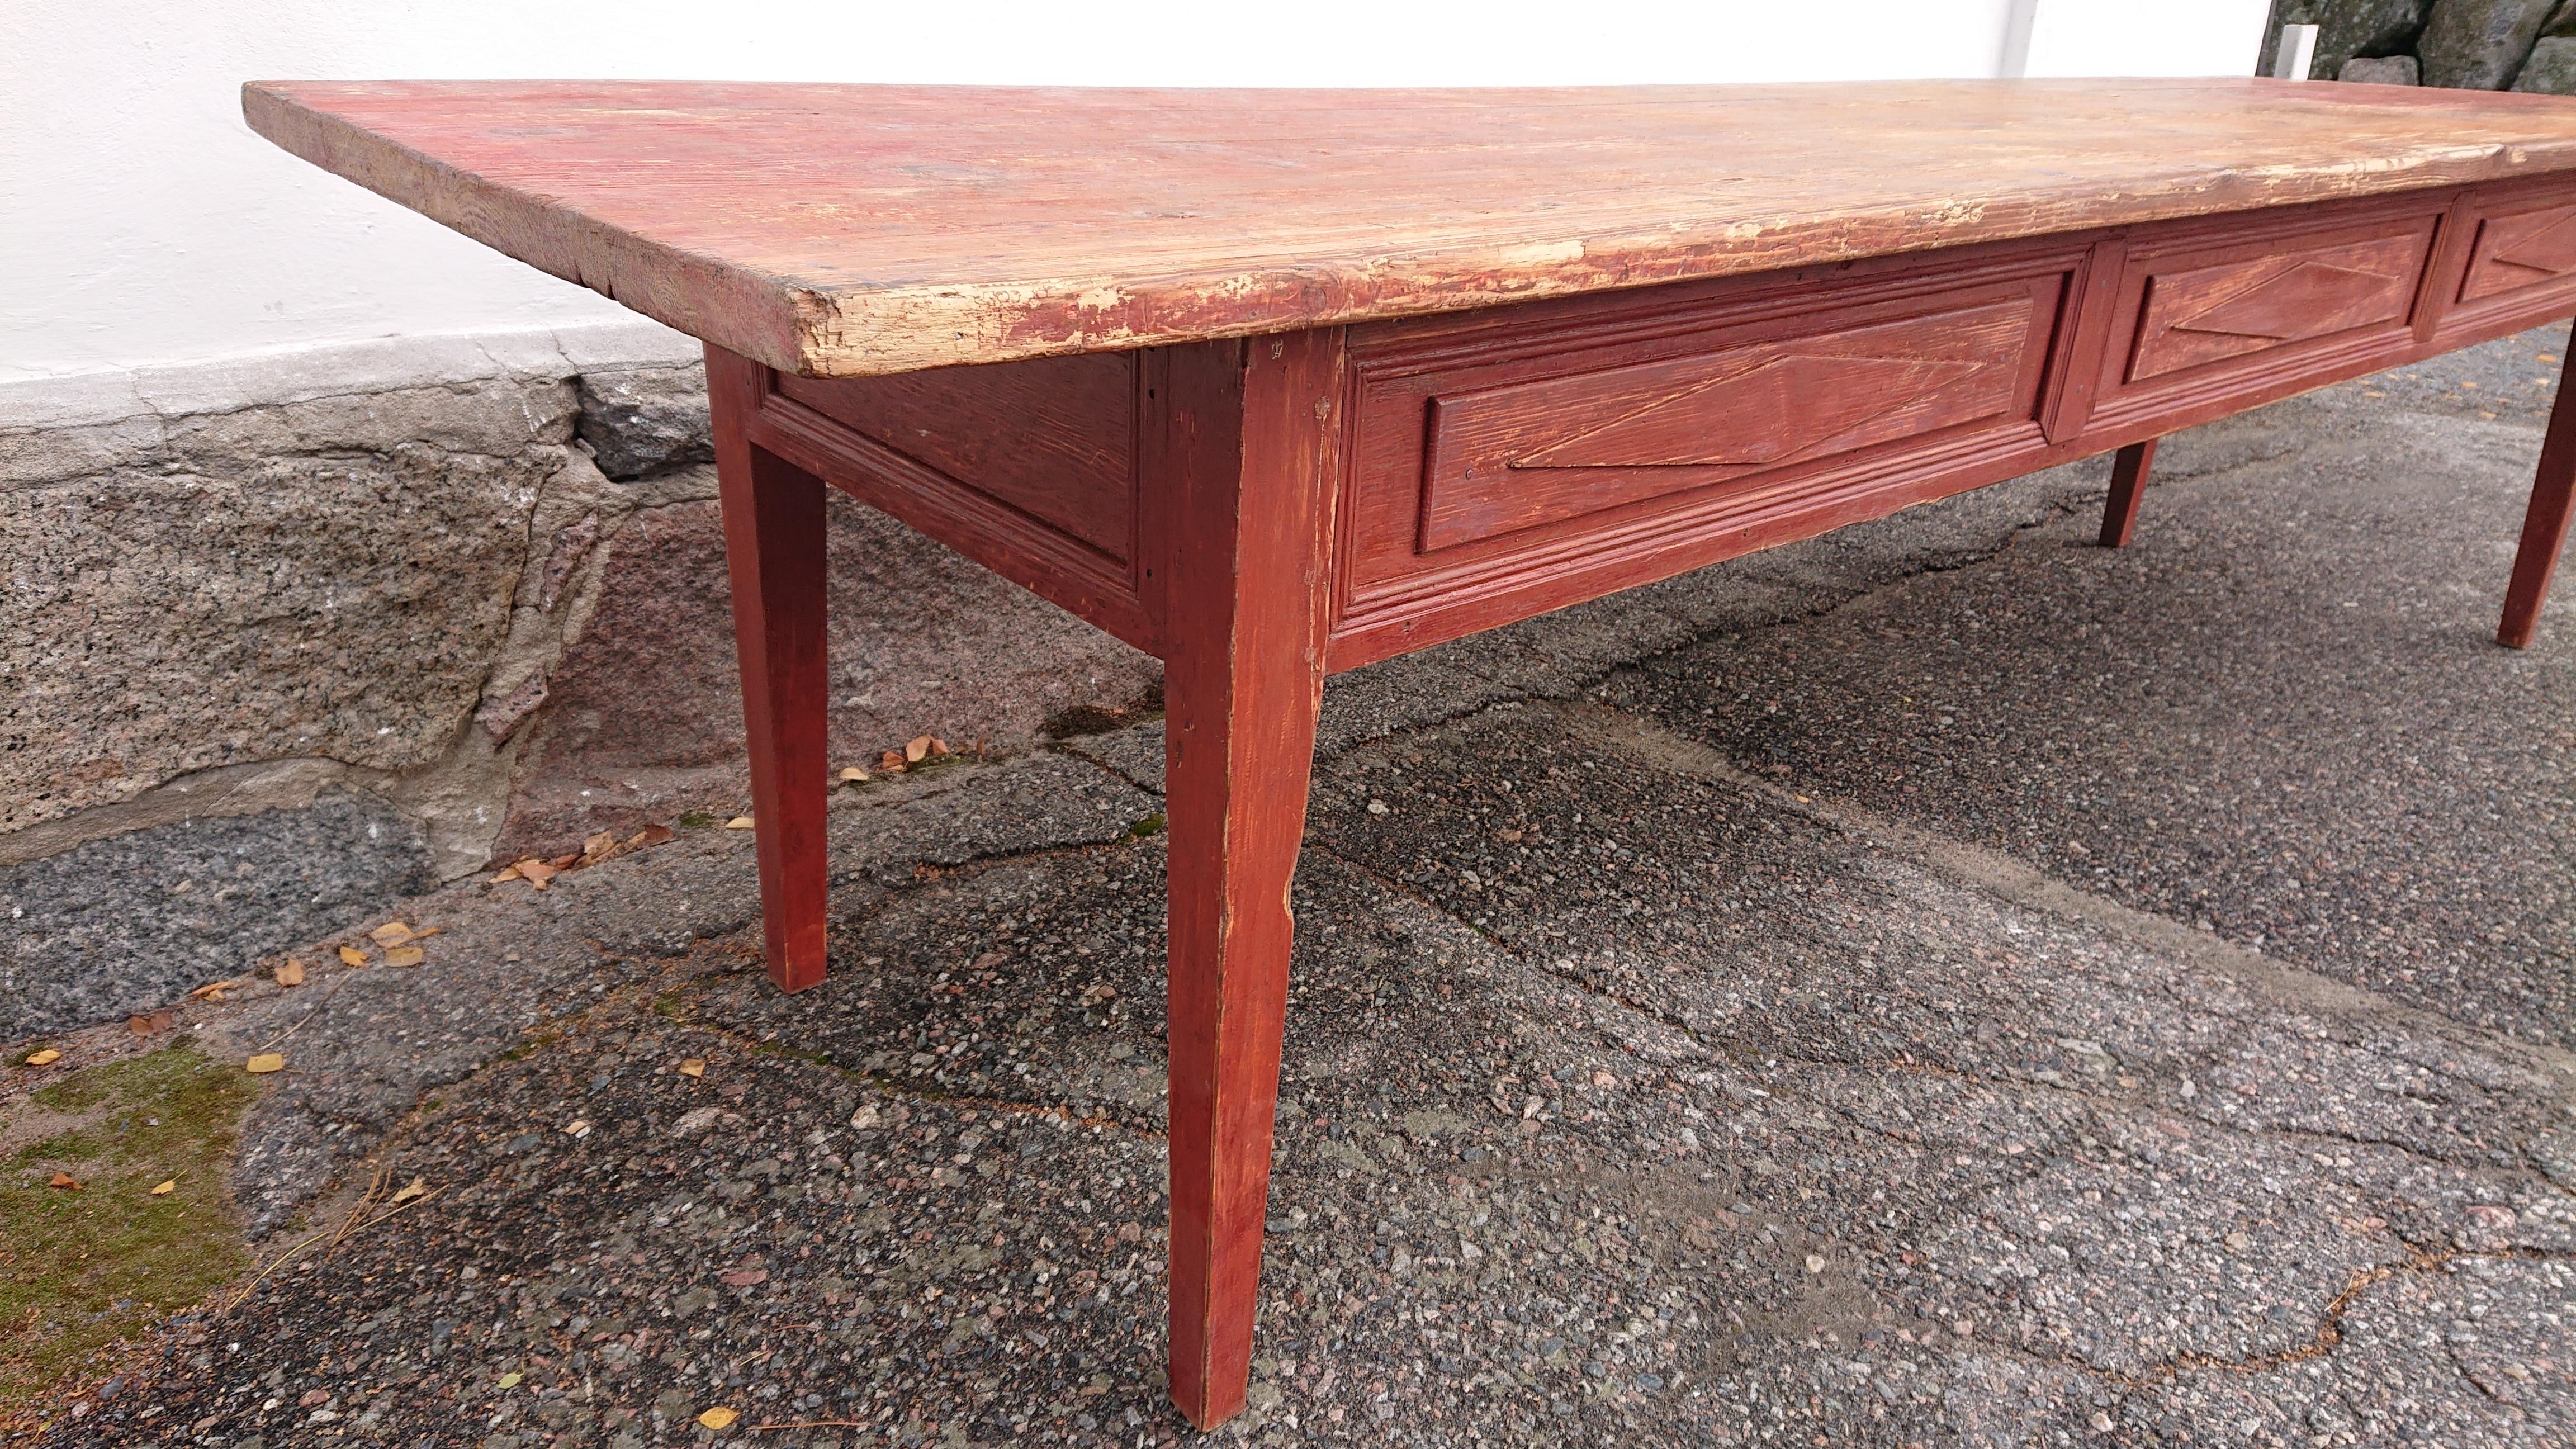 19th Century Swedish Gustavian Long Table Originalpaint In Good Condition For Sale In Boden, SE